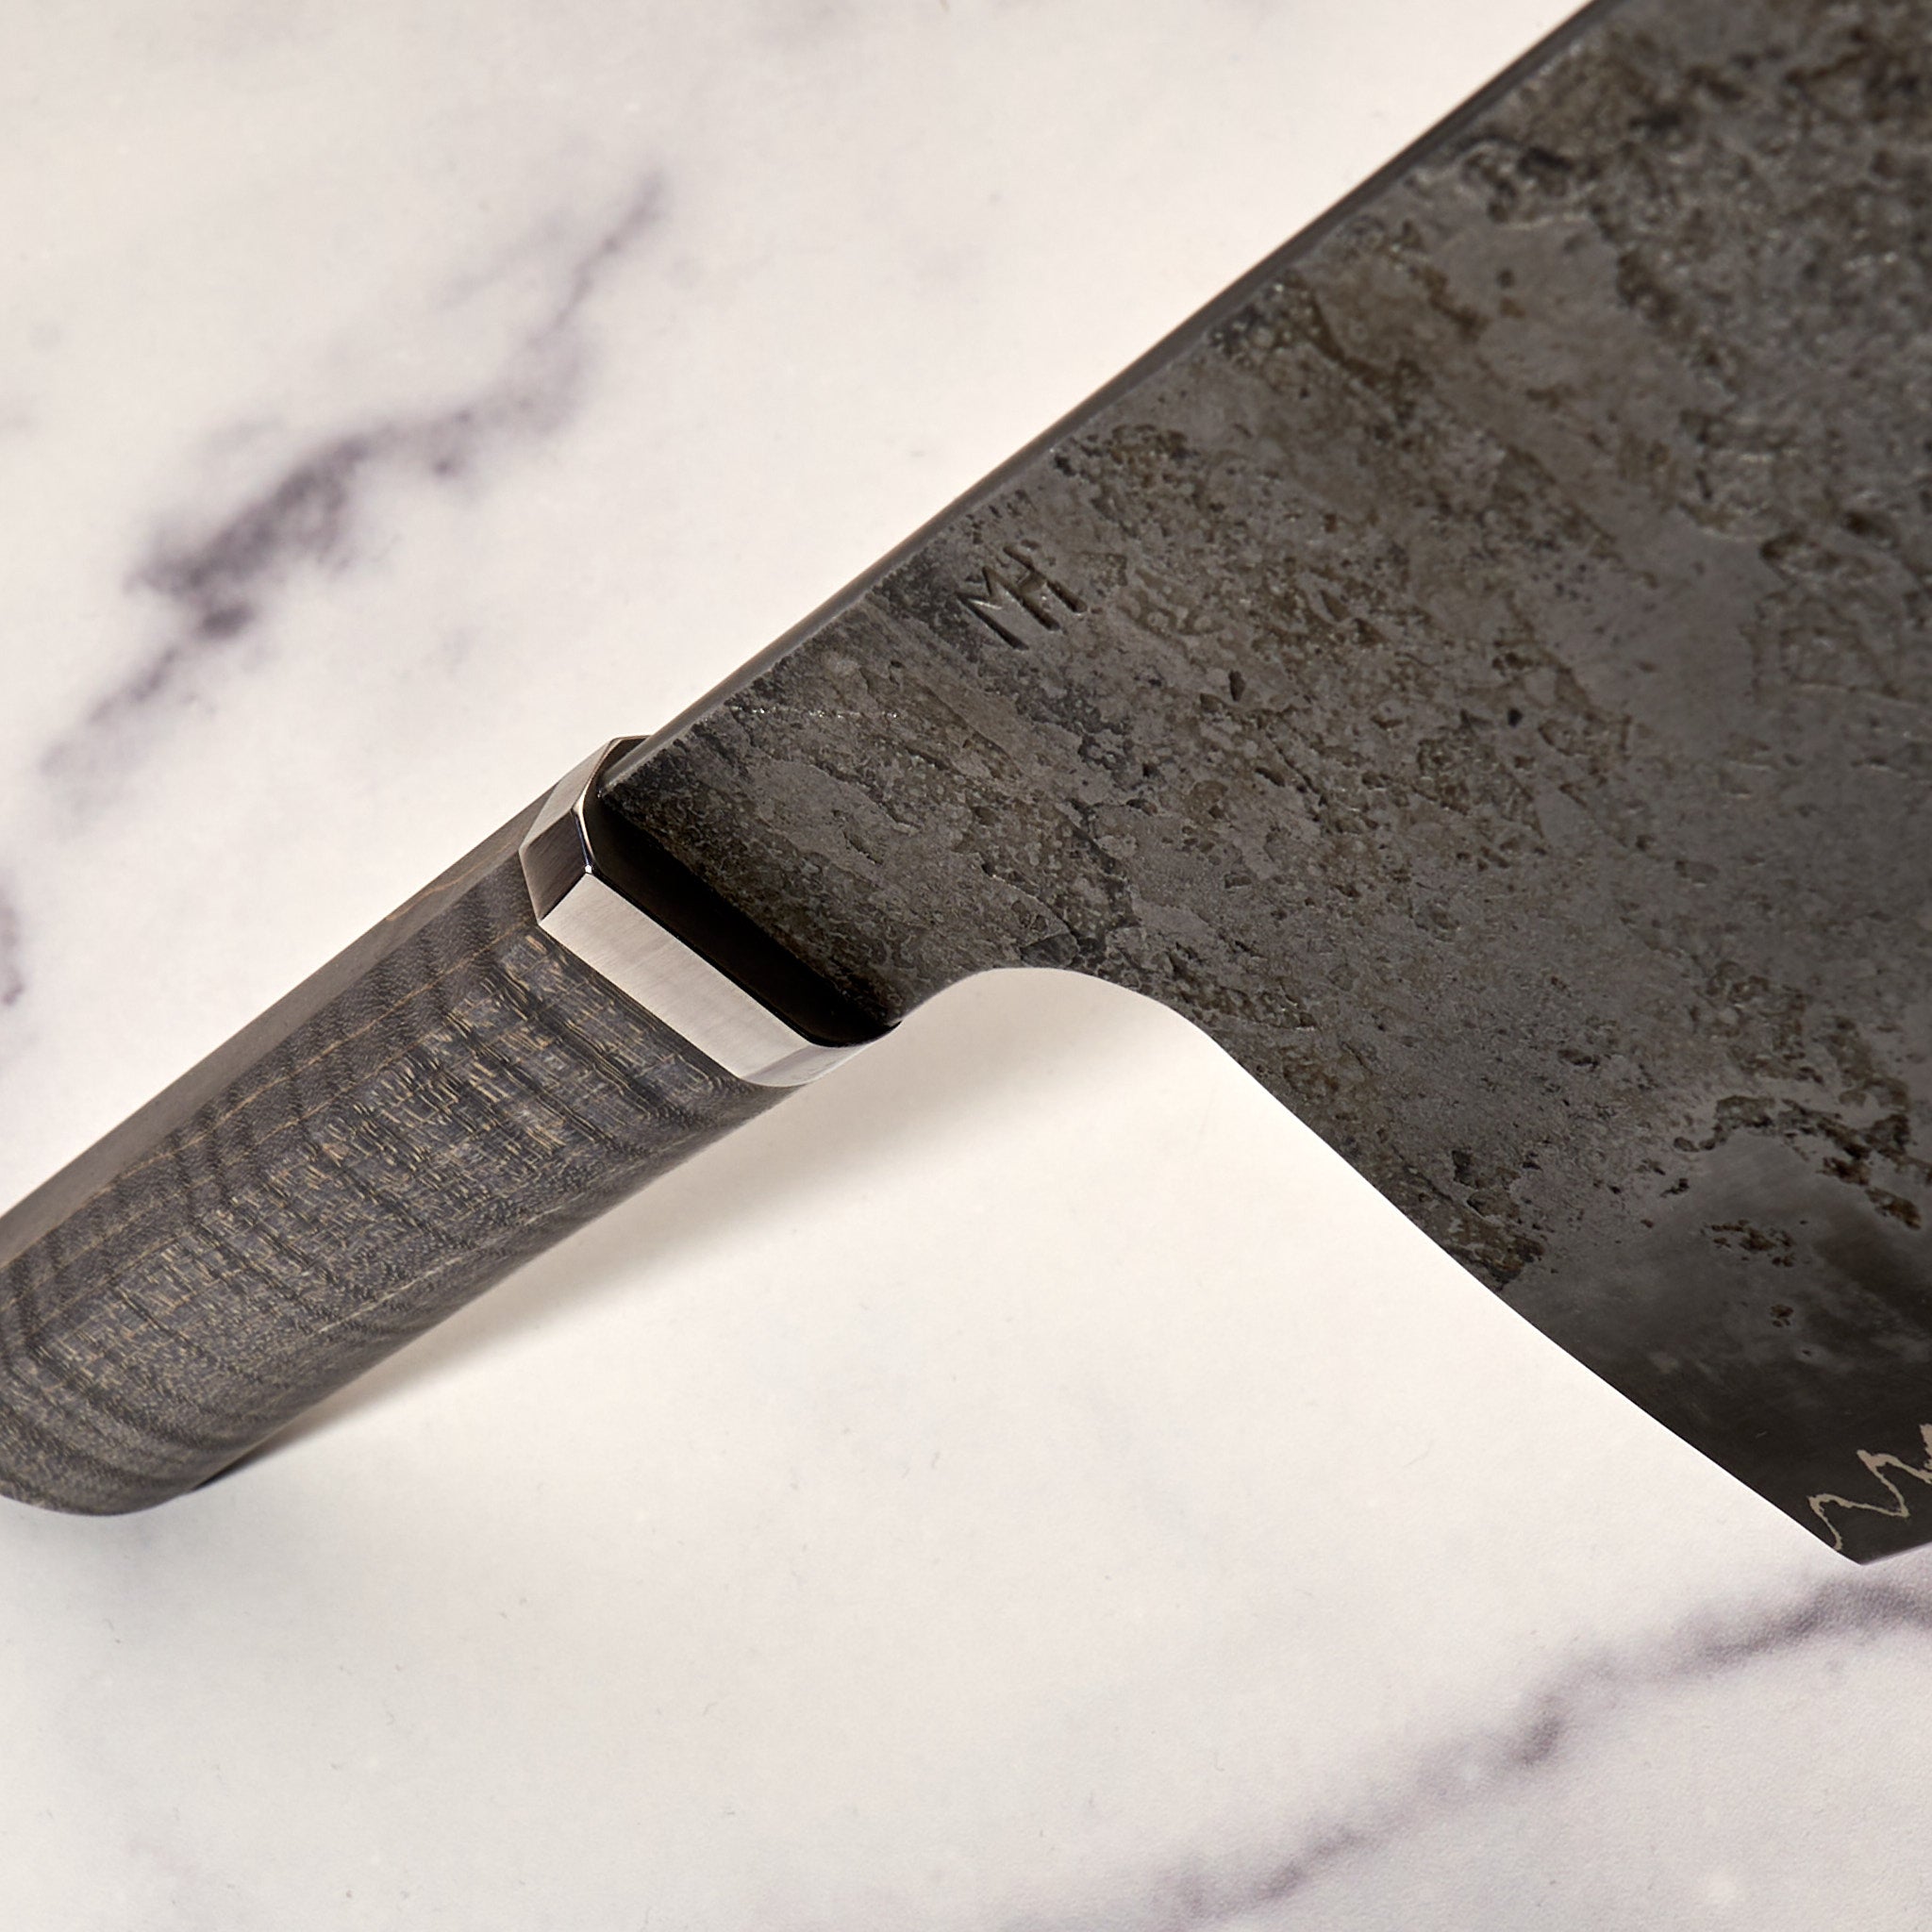 Master Lehja™ - Hand Forged Cleaver Knife – Sikkina